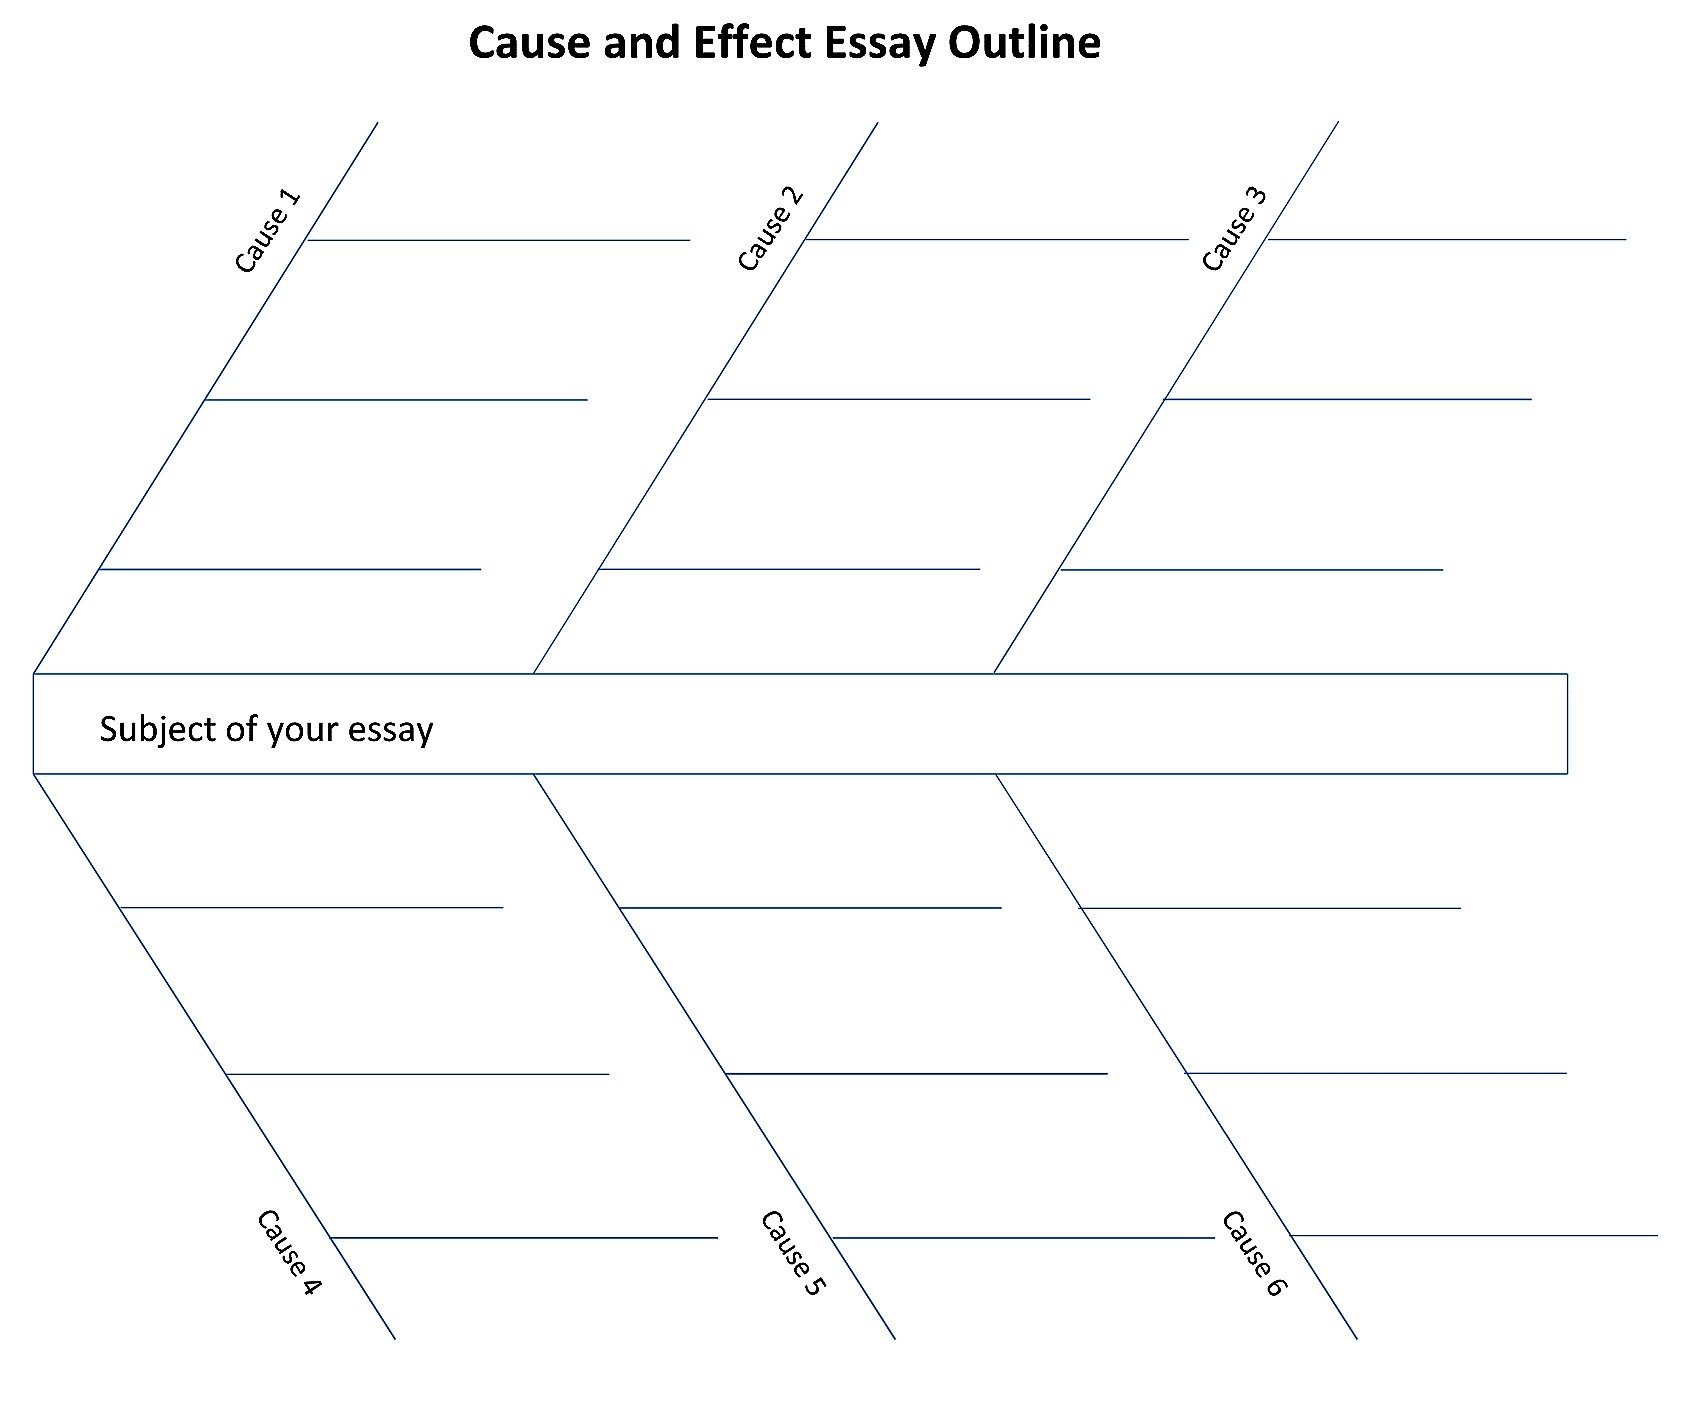 in a cause and effect essay